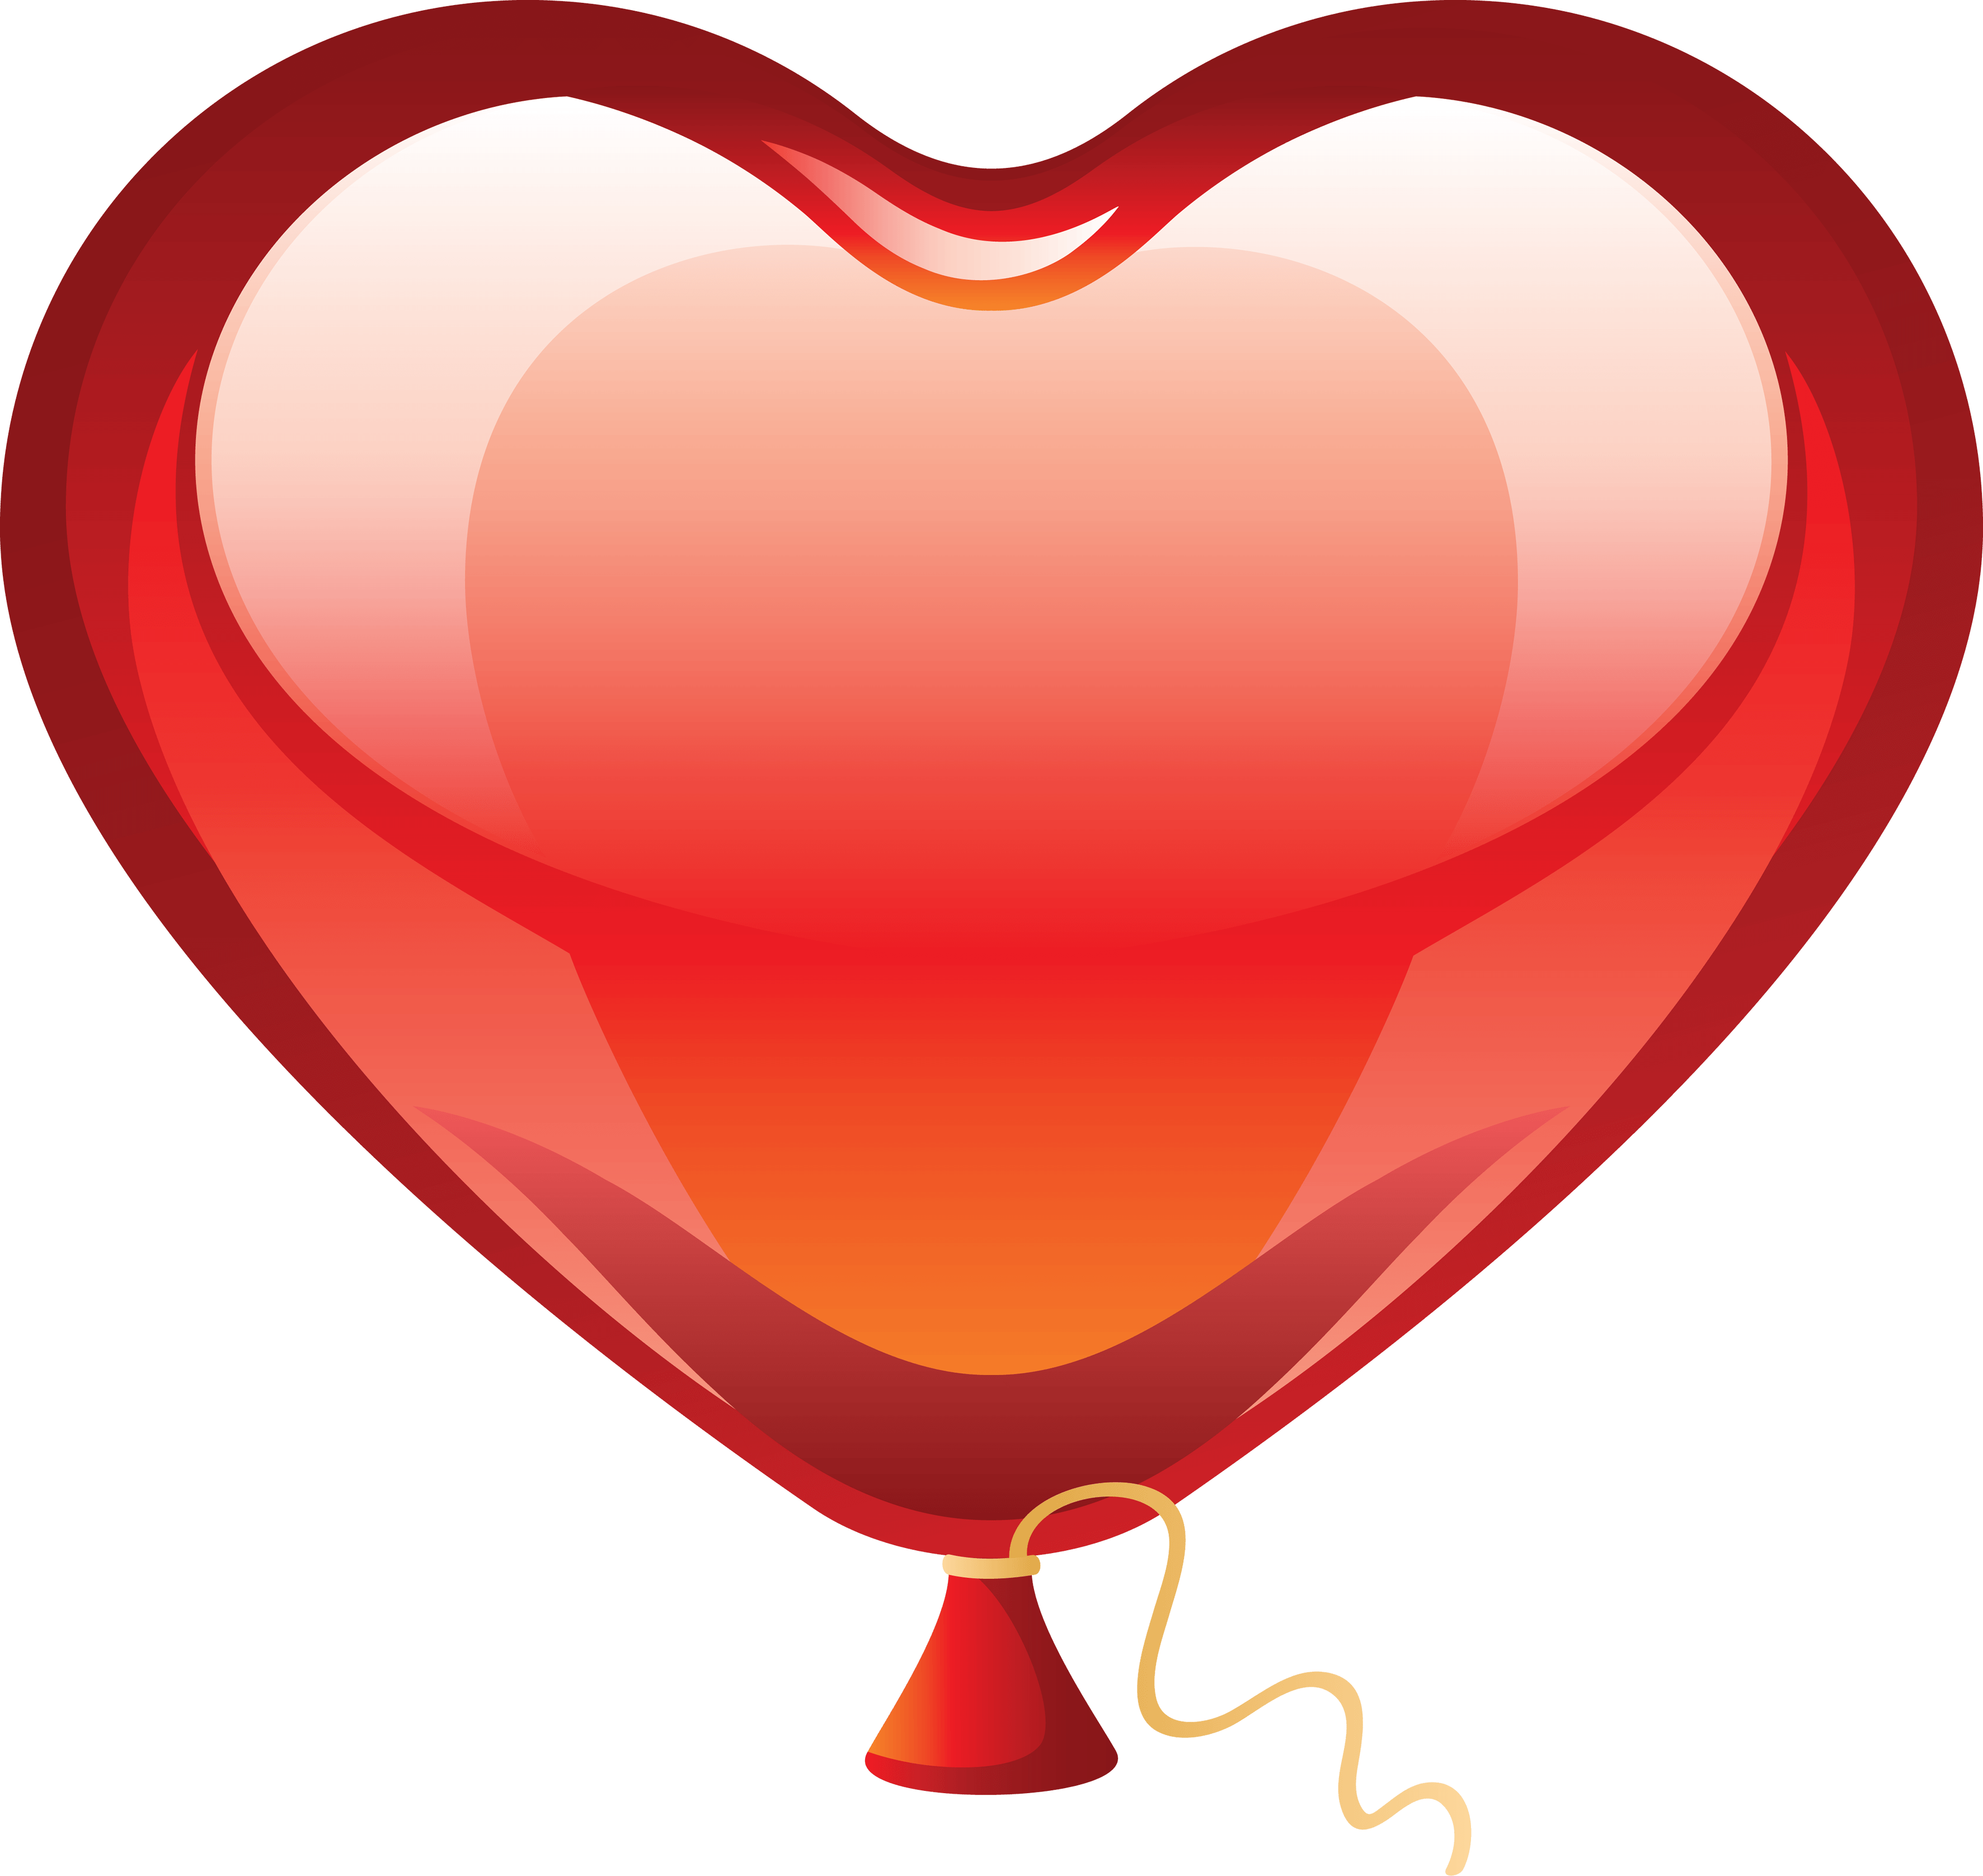 Heart Balloon PNG Images Transparent Background | PNG Play